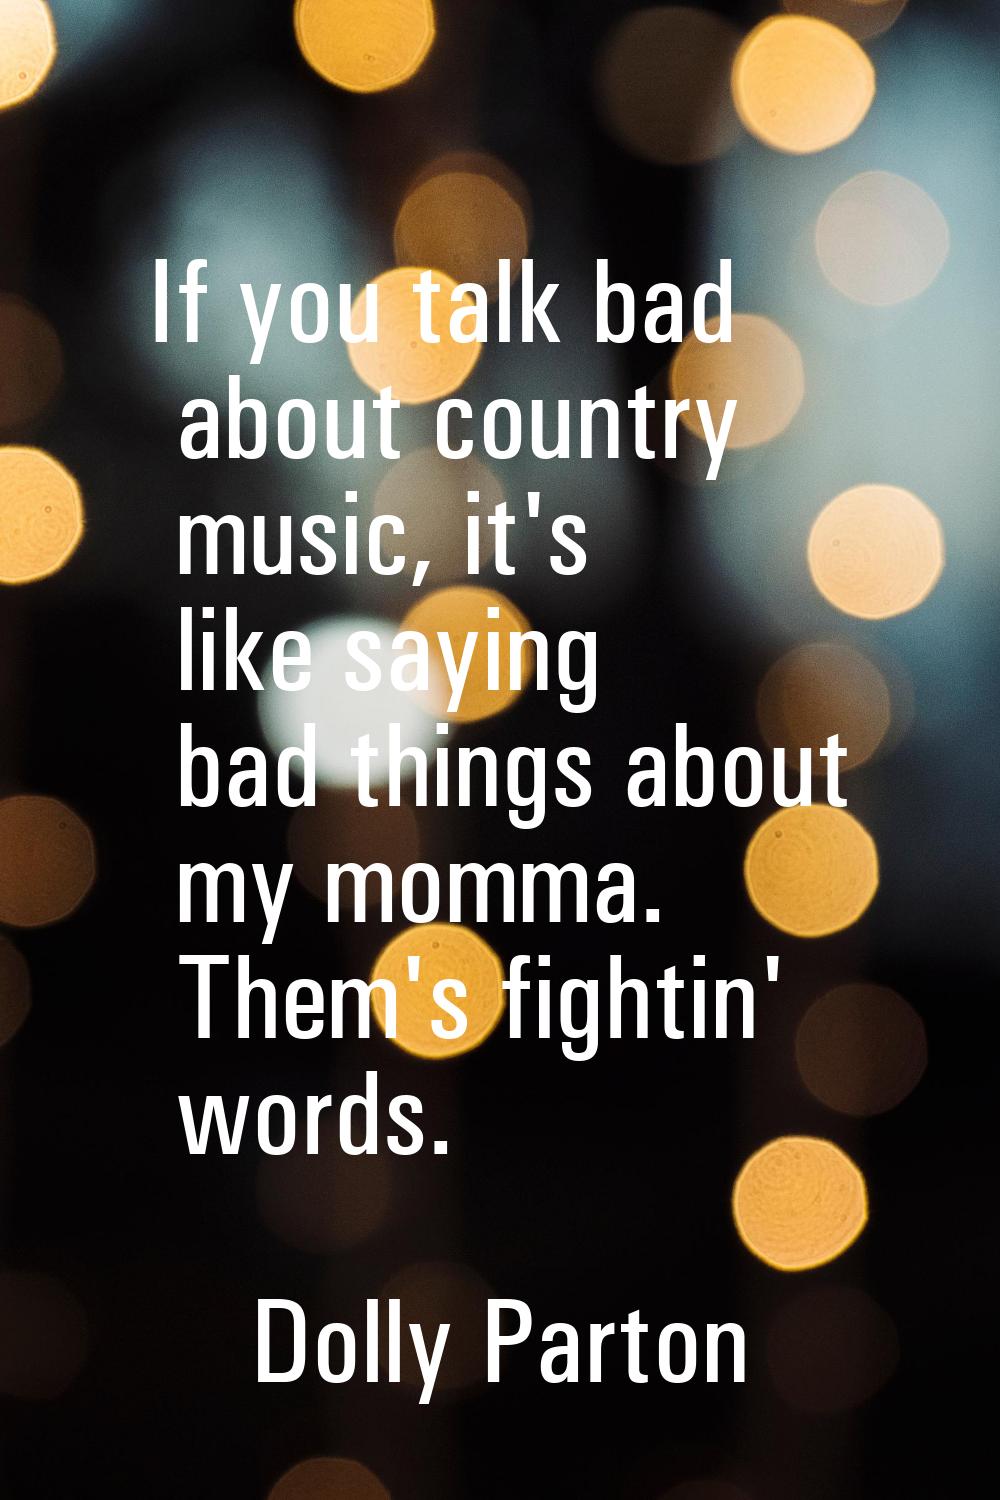 If you talk bad about country music, it's like saying bad things about my momma. Them's fightin' wo